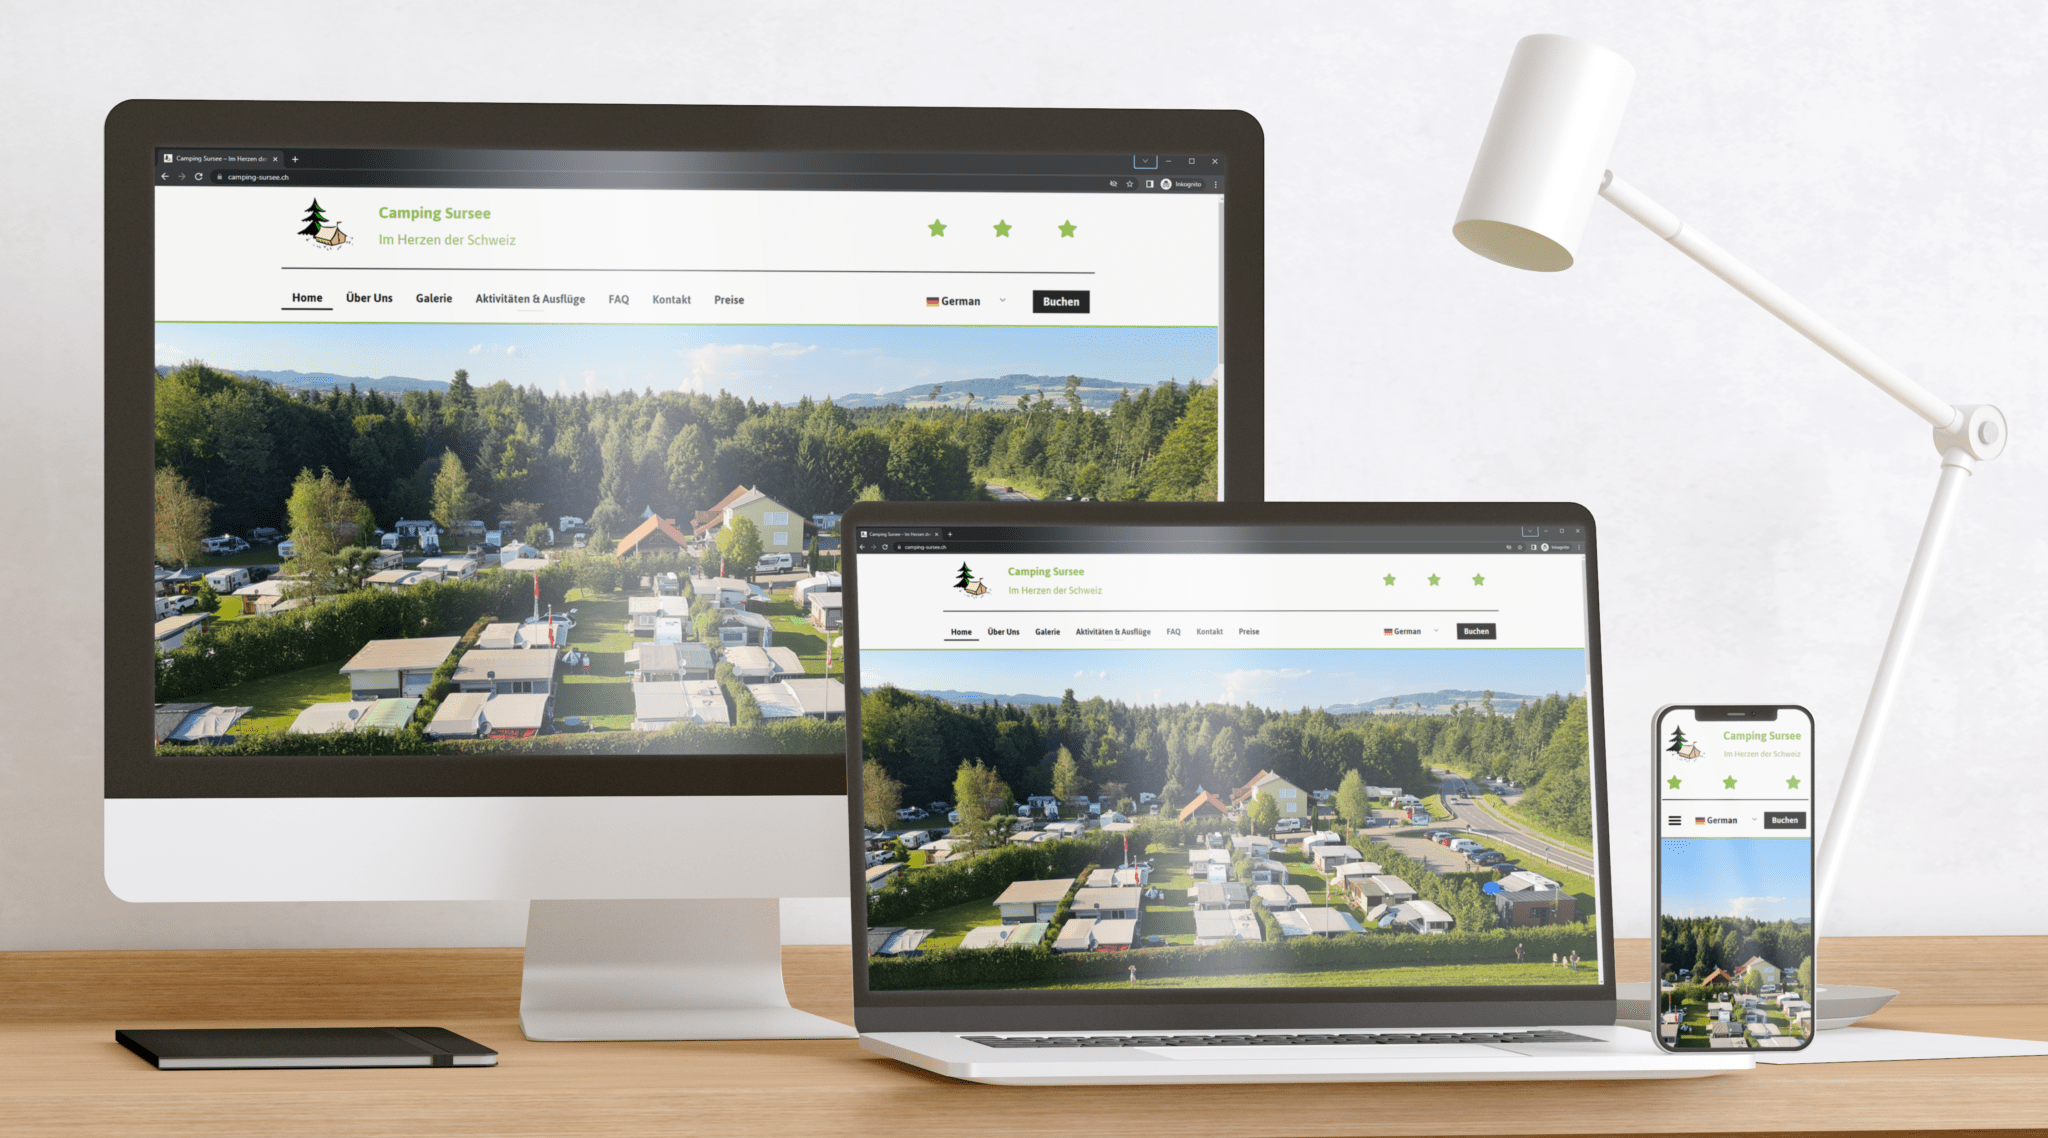 Camping Sursee Website Preview